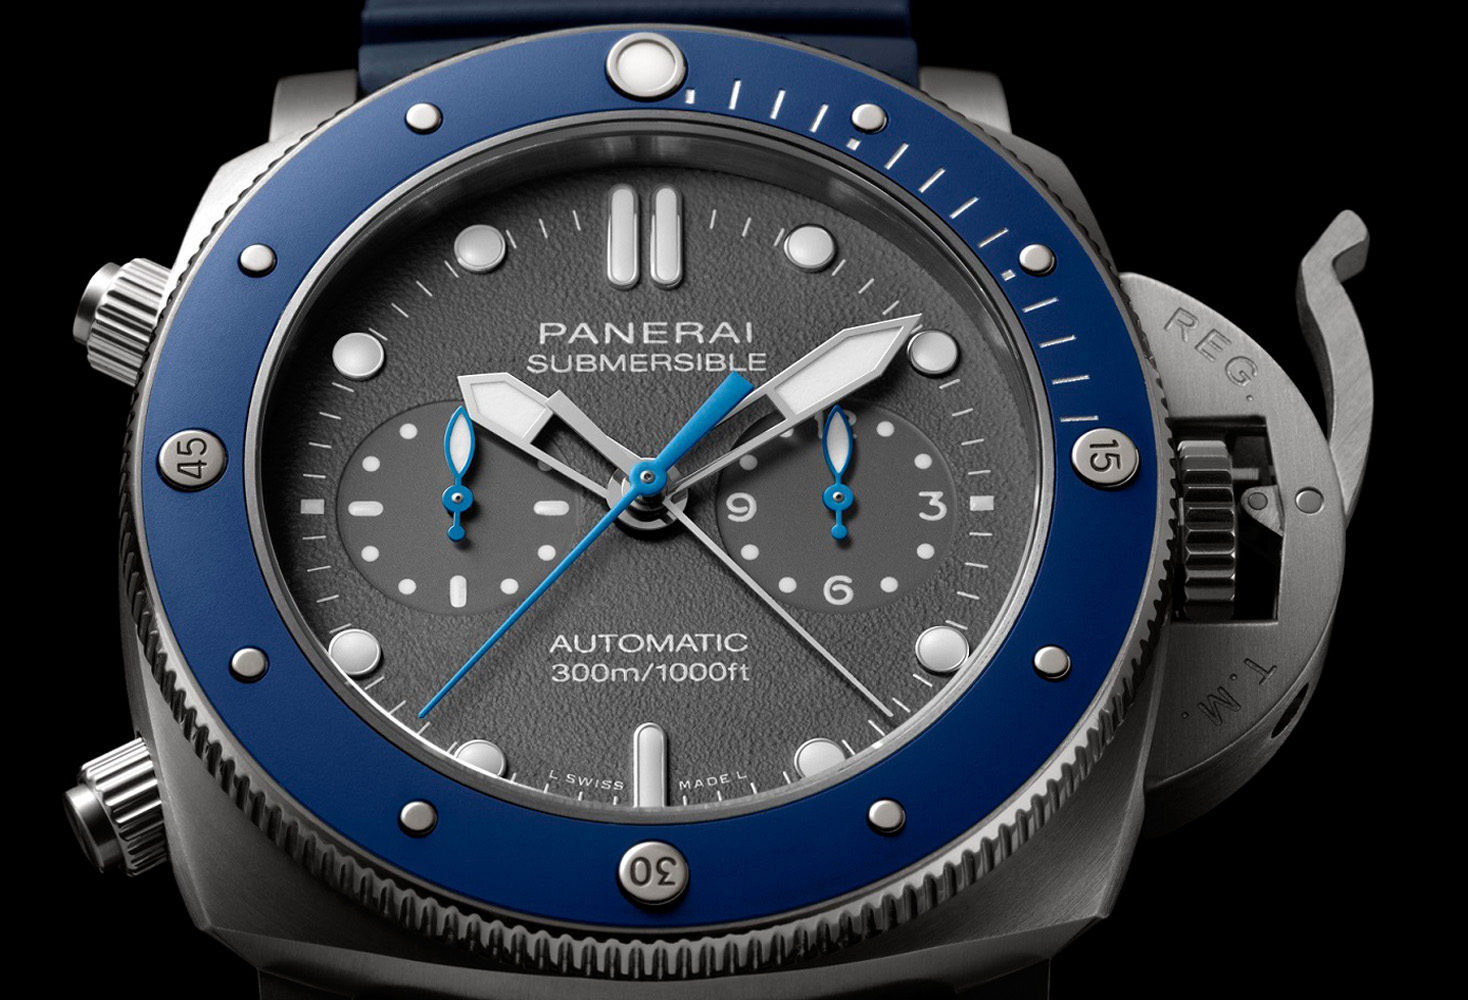 Panerai Submersible Chrono Guillaume Néry, panerai, panerai watch, panerai watch price, Guillaume Néry, underwater watch